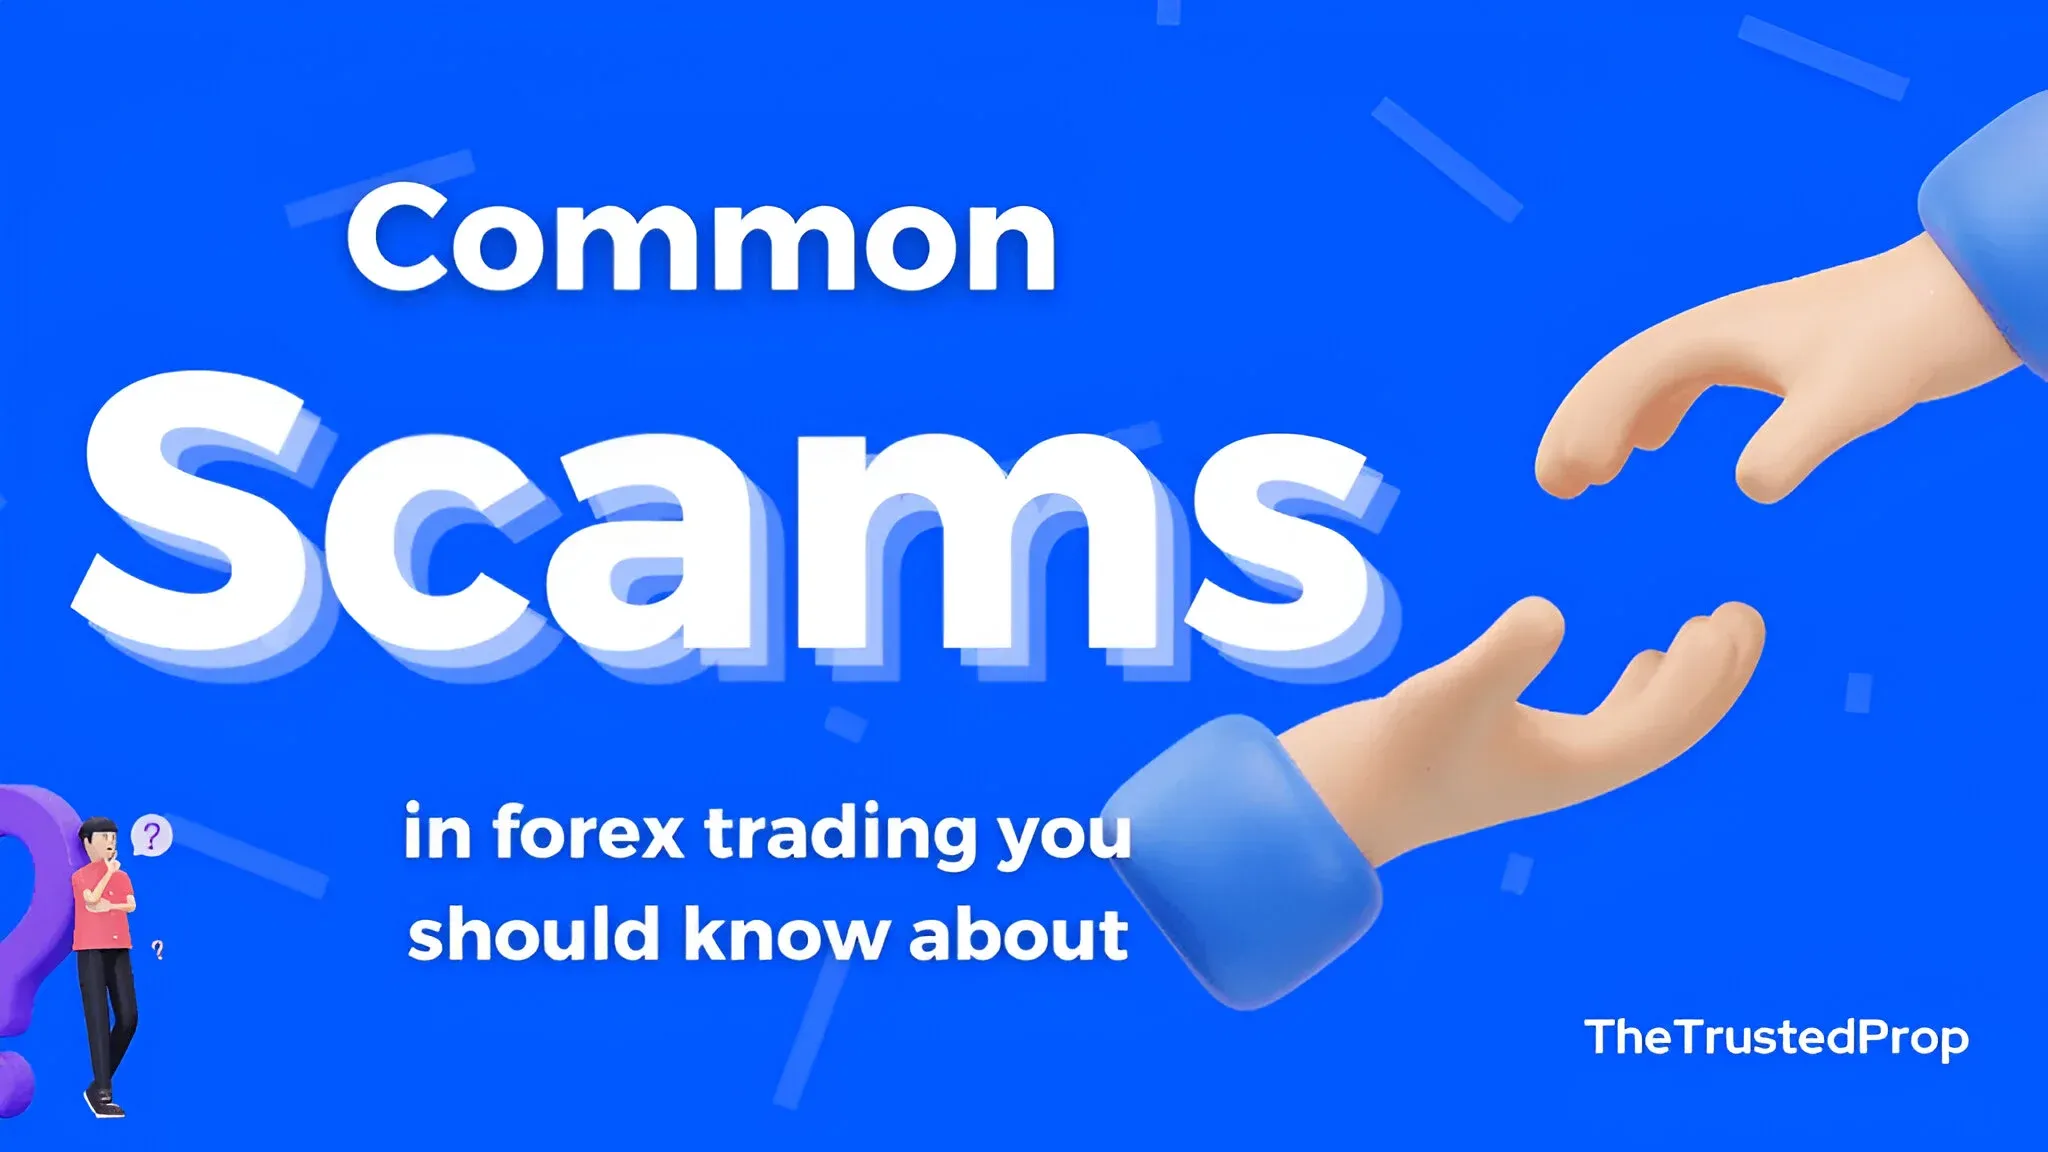 Cmmon Scams in Forex Trading.webp